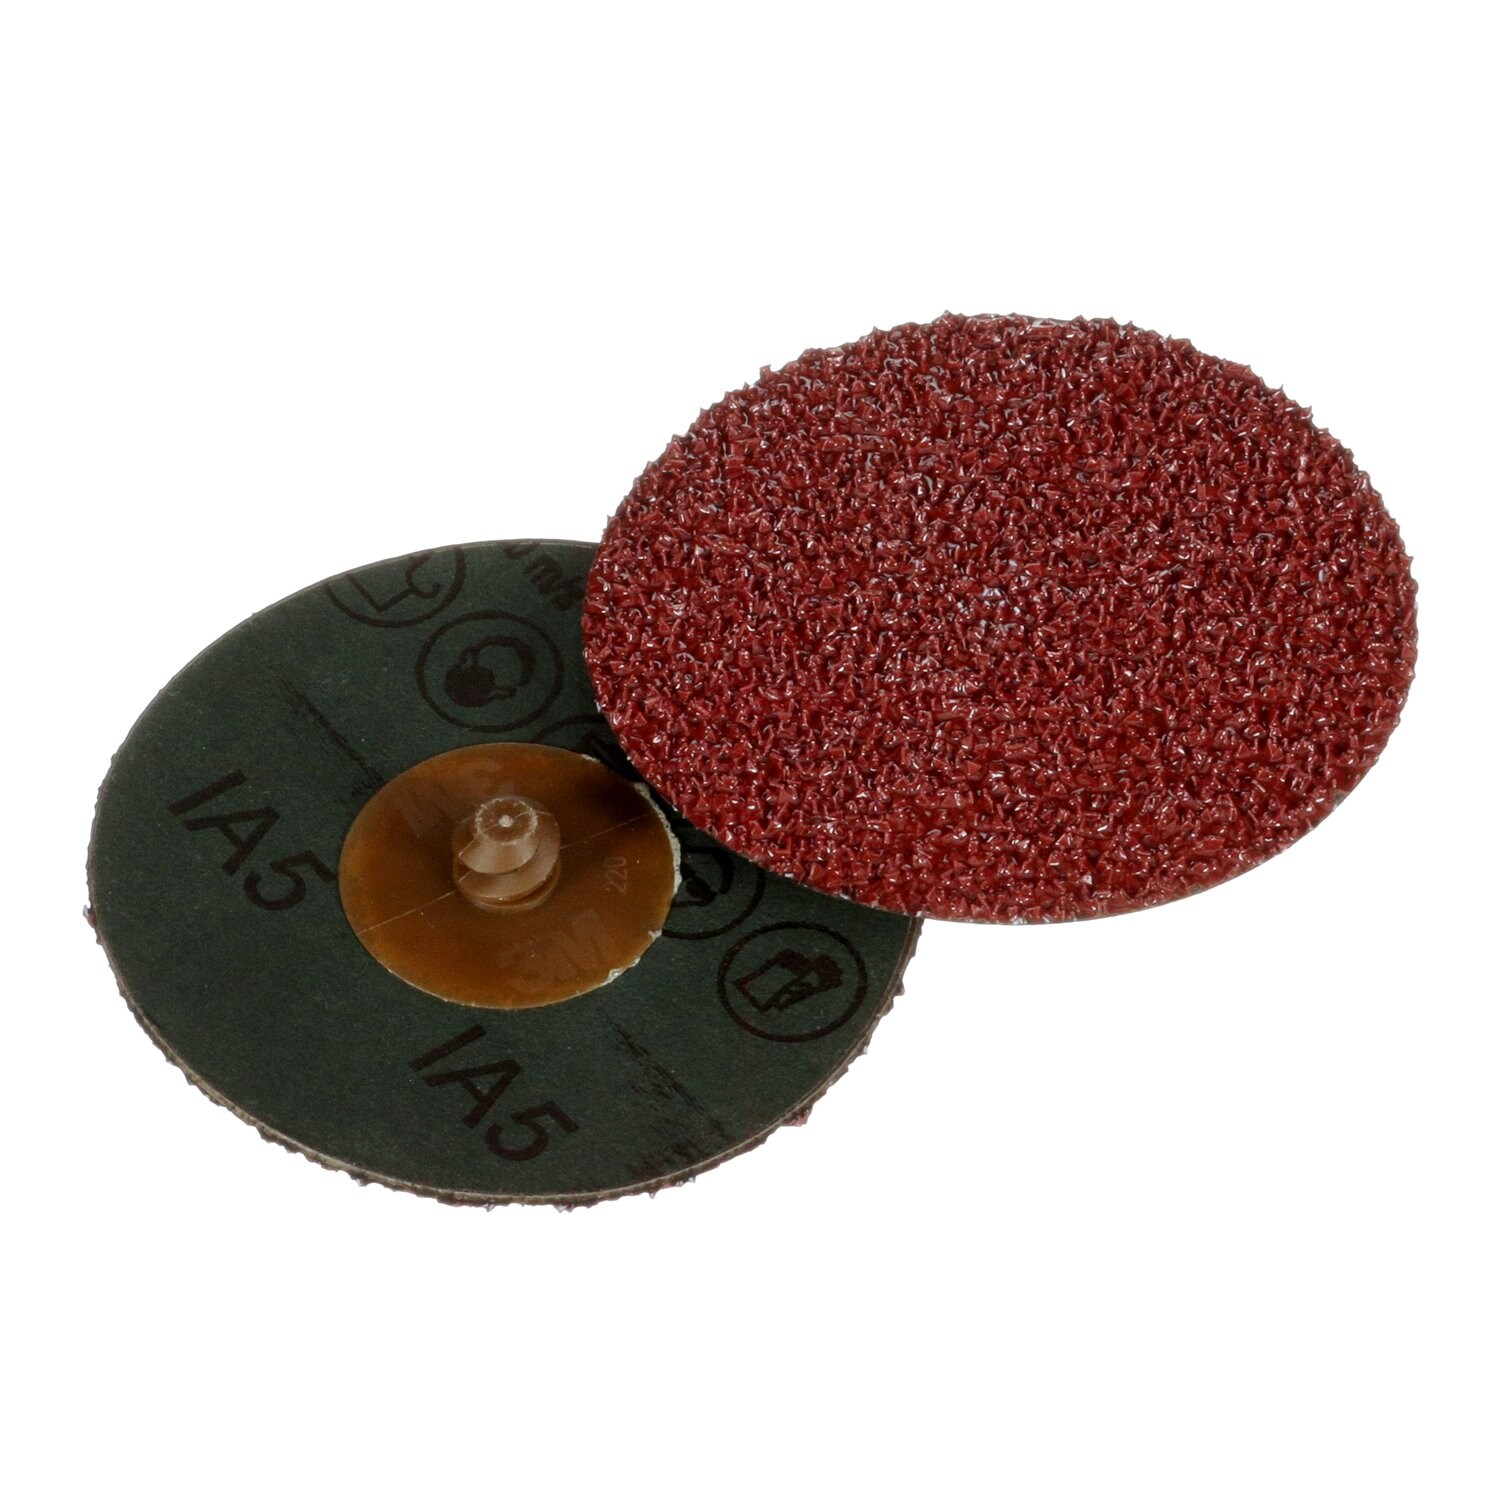 00051115667794, 3M Cubitron II Roloc Fibre Disc 982C, 36+, TR, Red, 3 in,  Die R300V, 50/Carton, 200 ea/Case, Aircraft products, Tapes